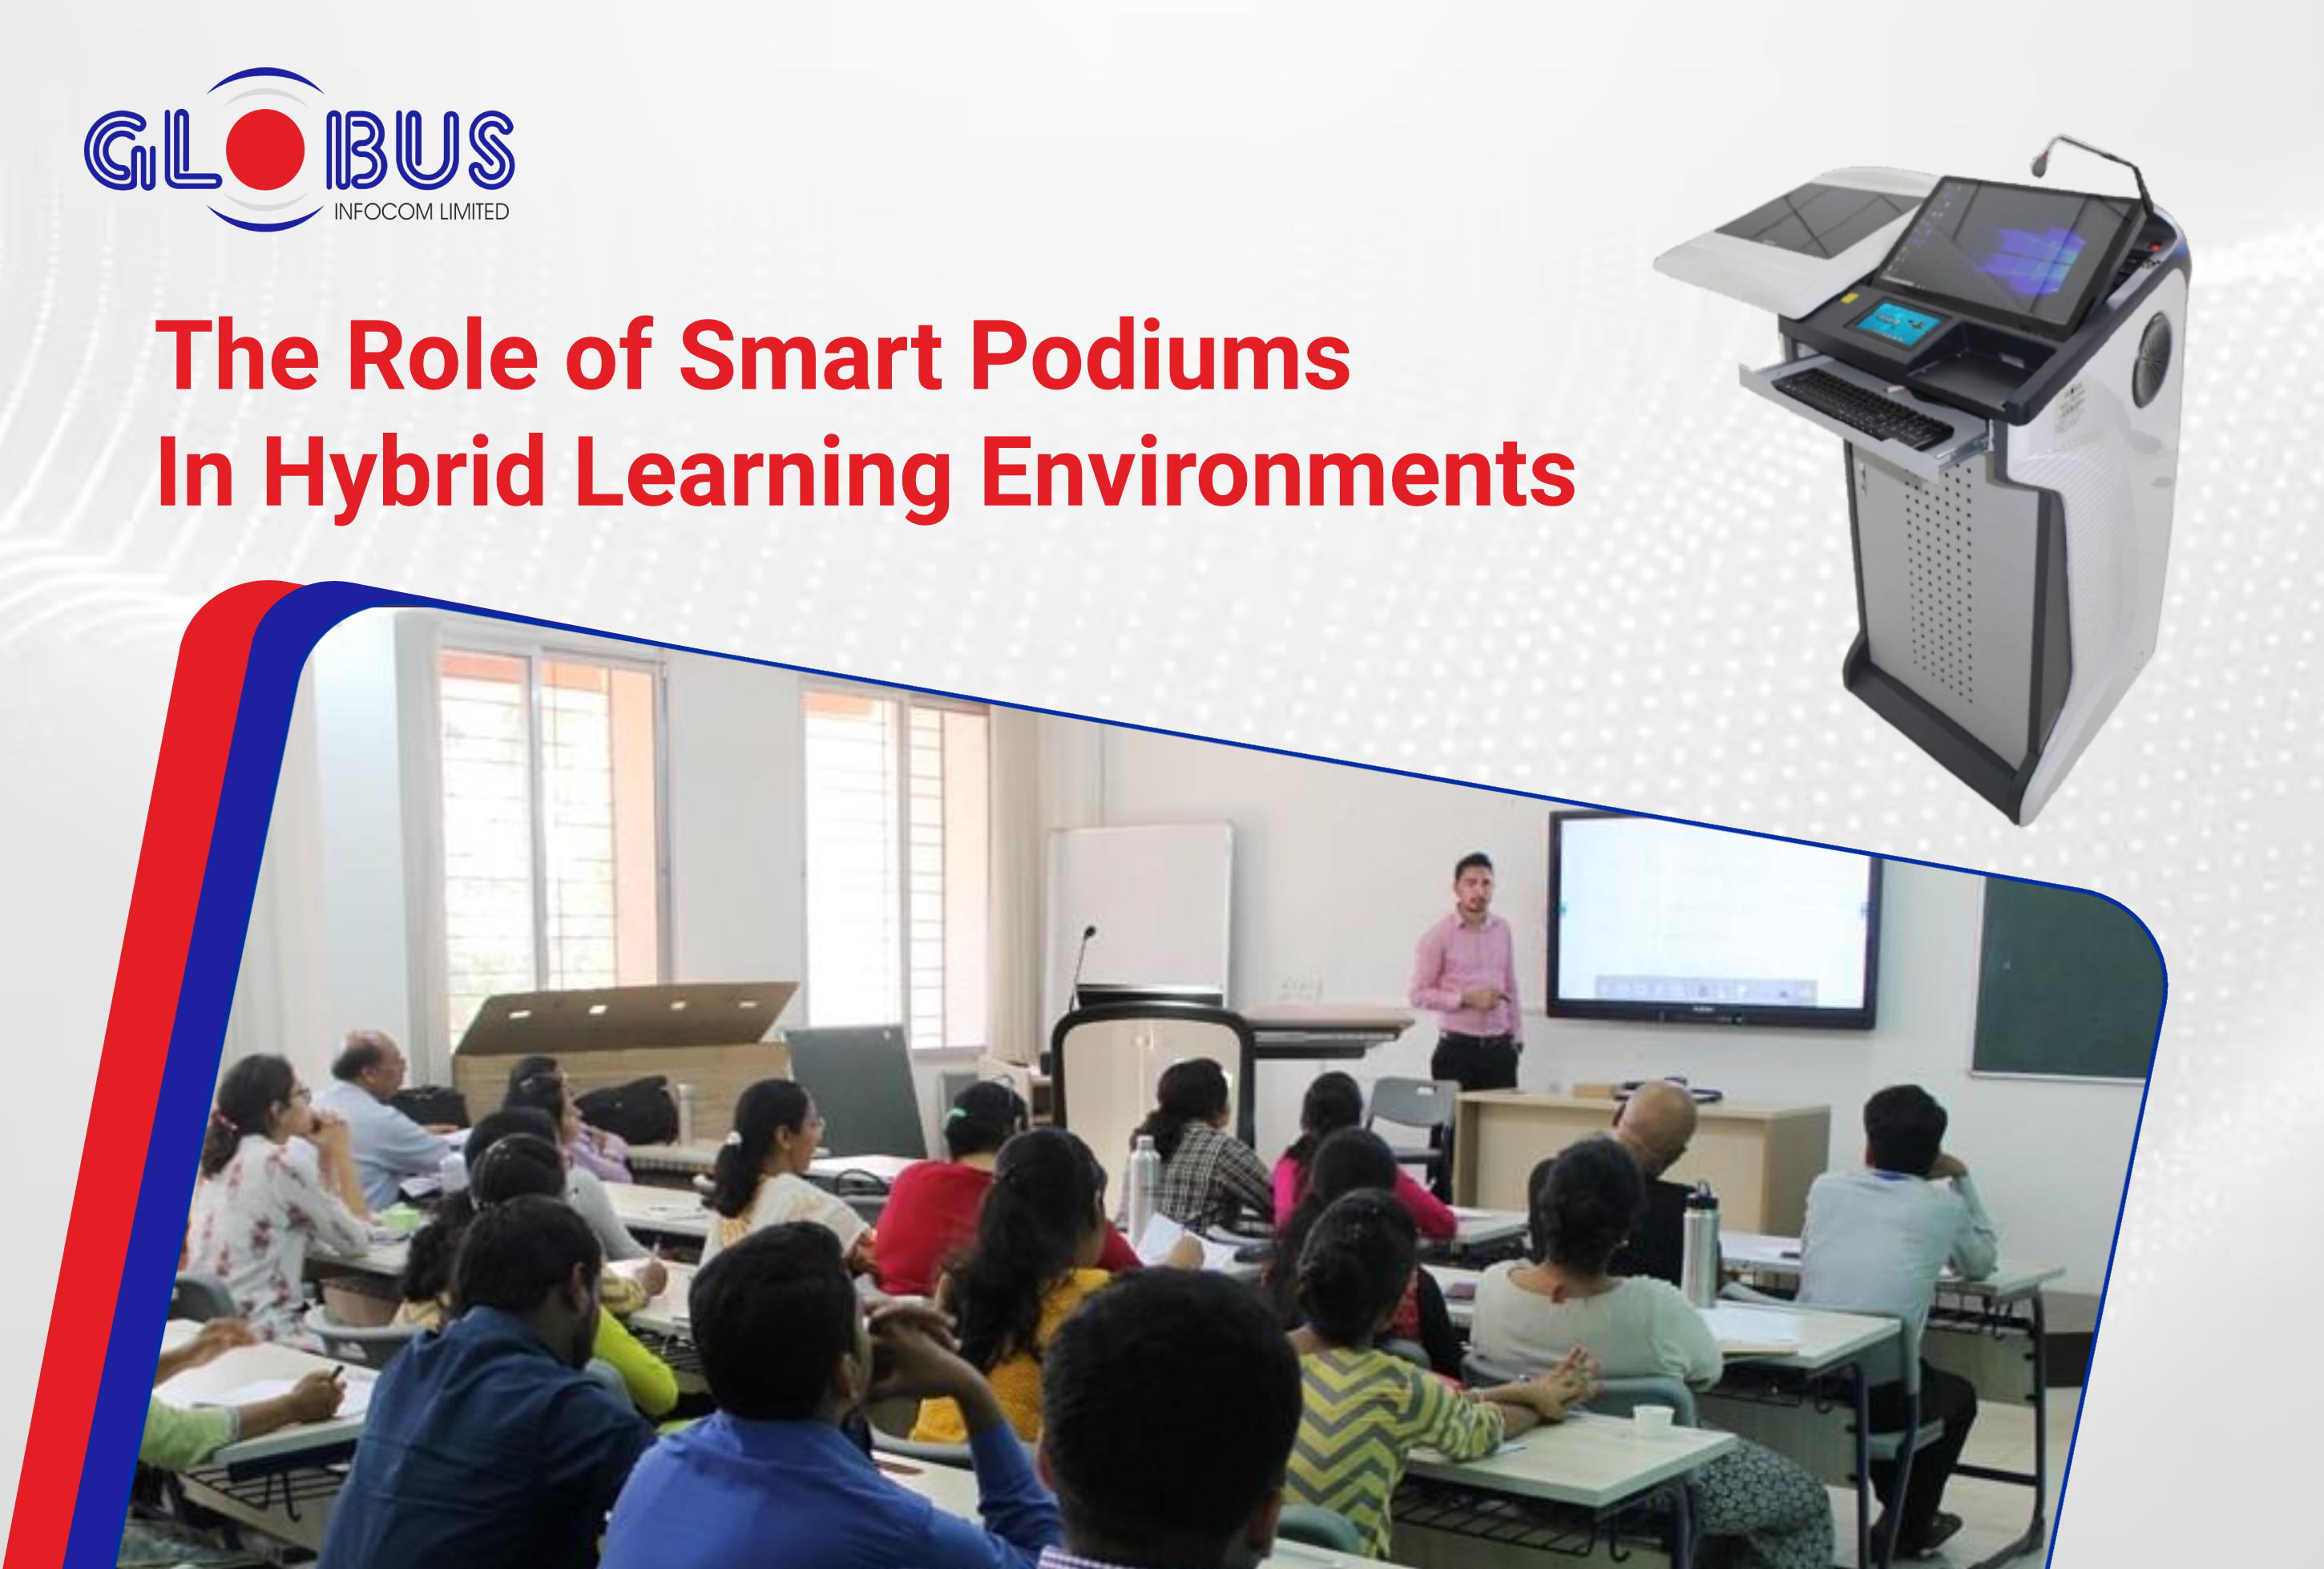 The Role of Smart Podiums in Hybrid Learning Environments